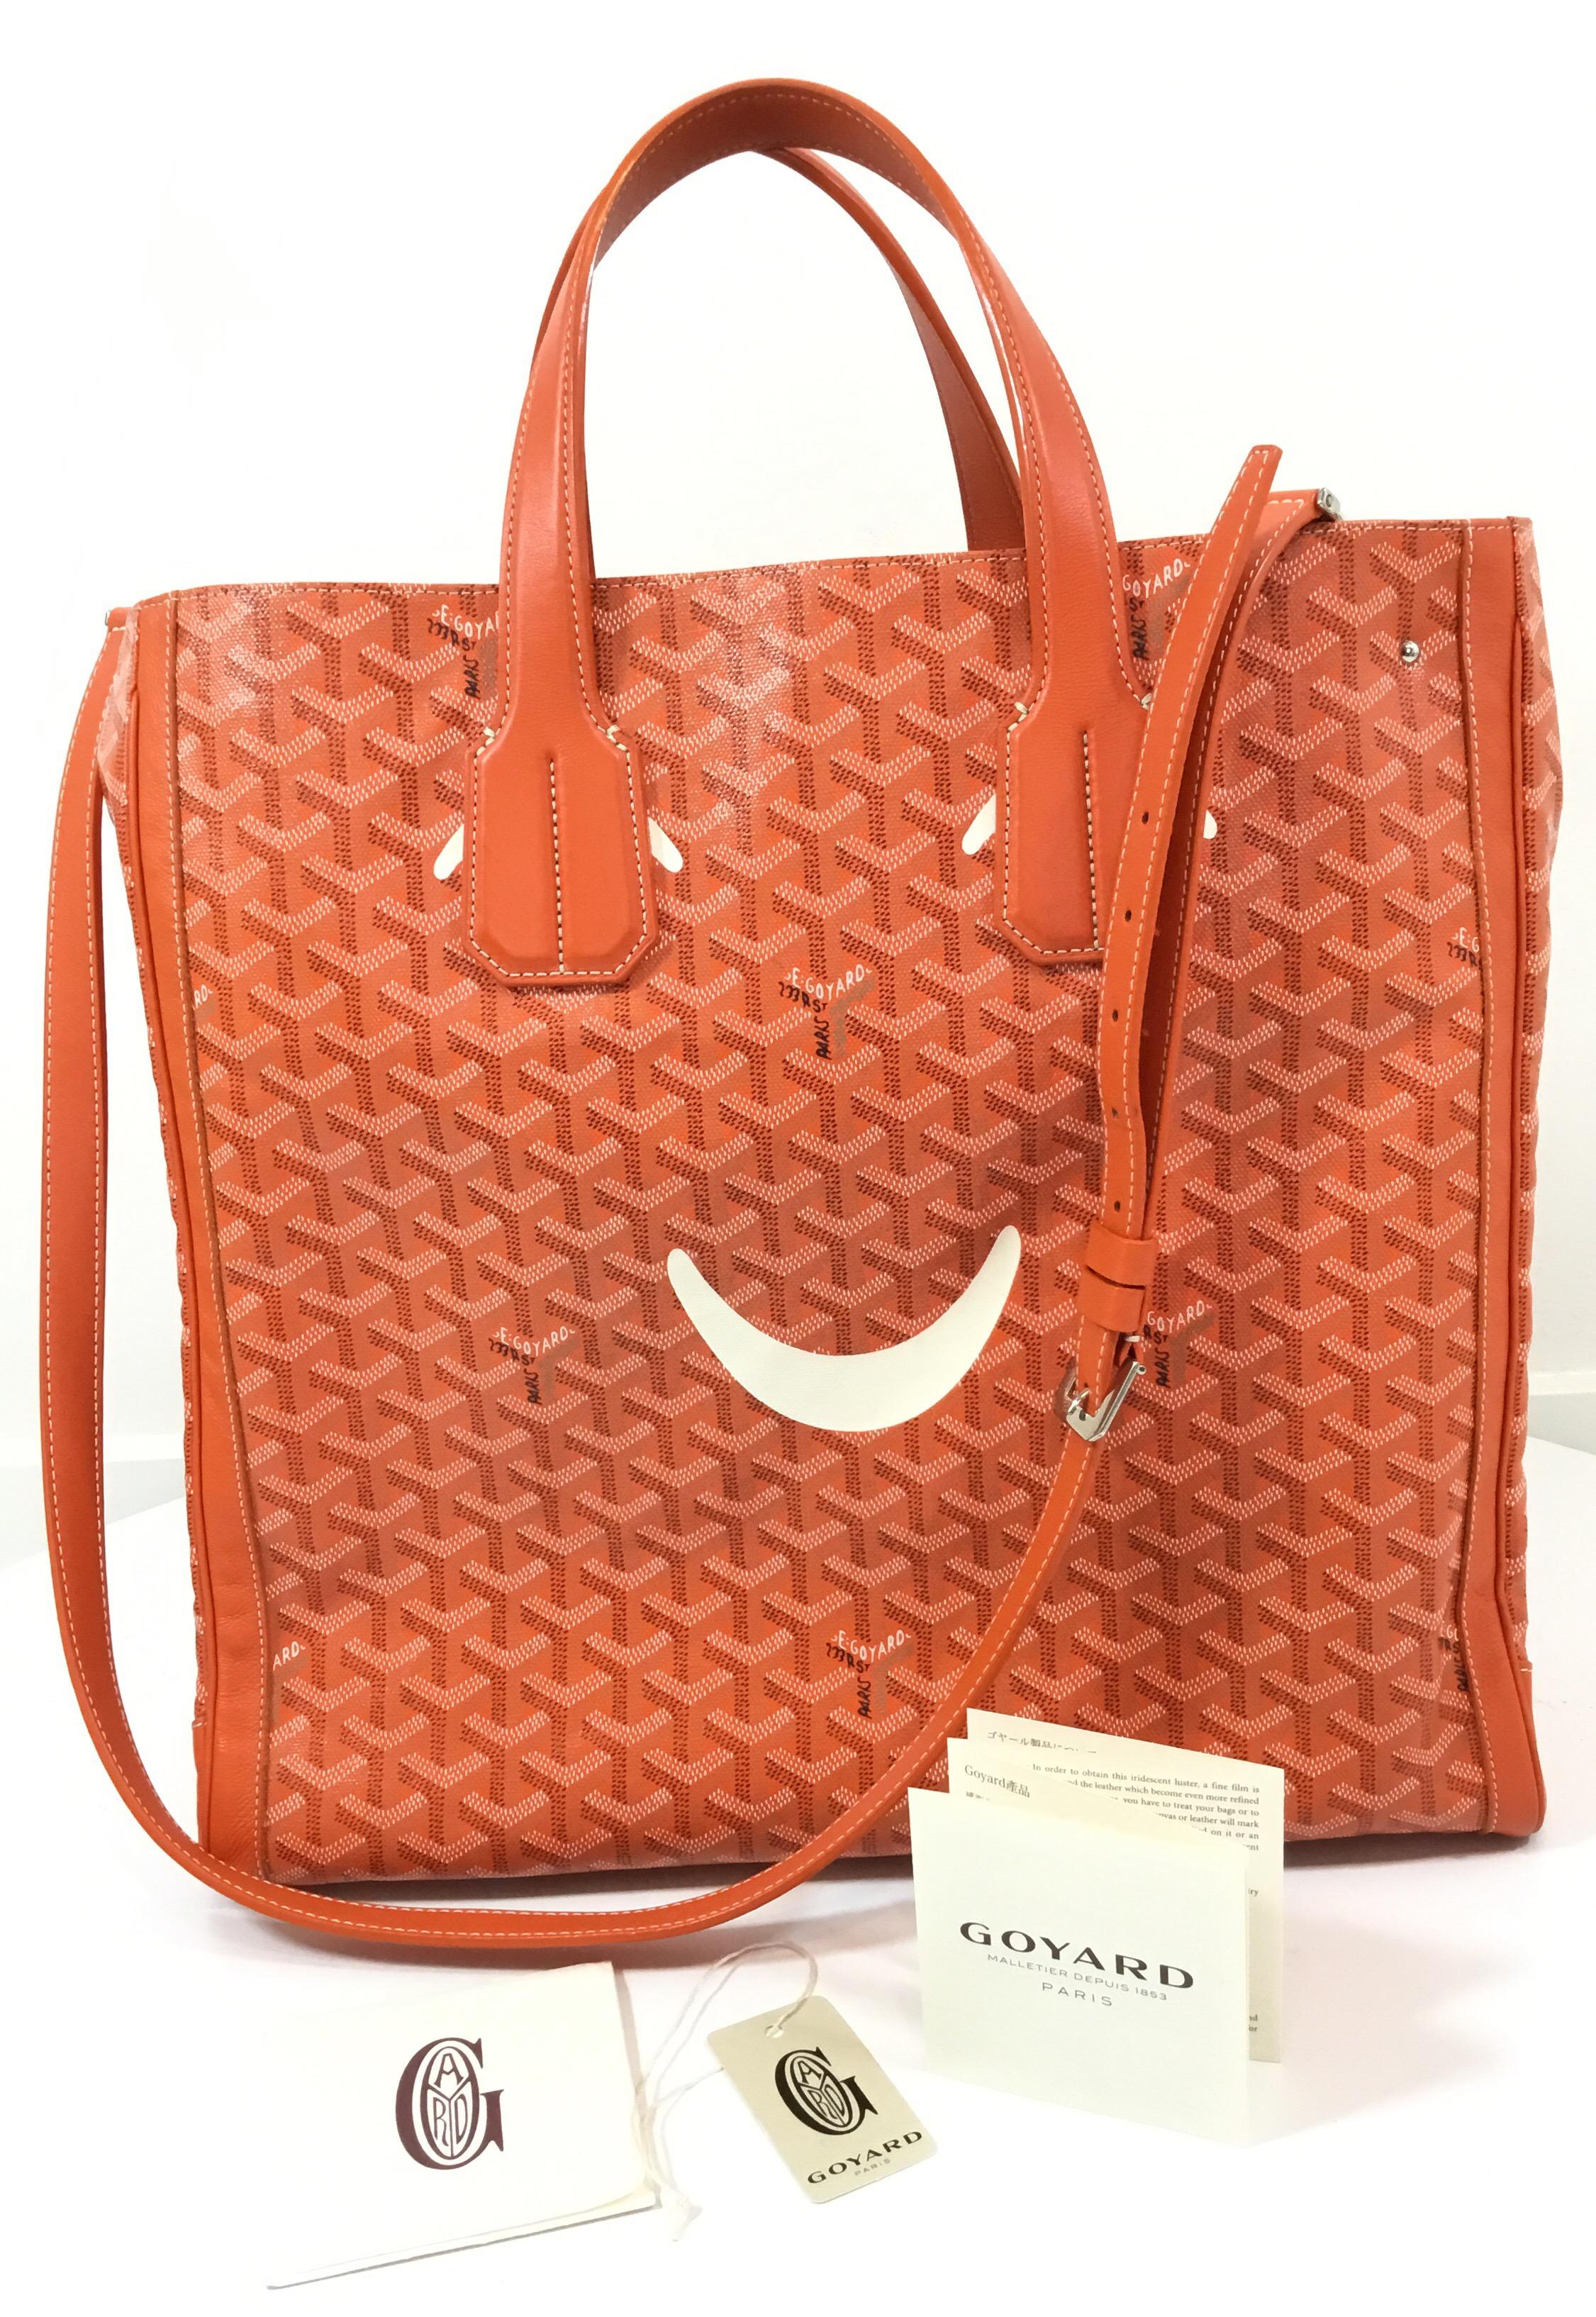 Goyard Voltaire Smile tote crafted in iconic Goyardine orange and multicolored canvas with reinforced leather edges, palladium hardware, 'Smiley' face accent at front exterior, single detachable shoulder strap, marigold canvas lining, dual flat top